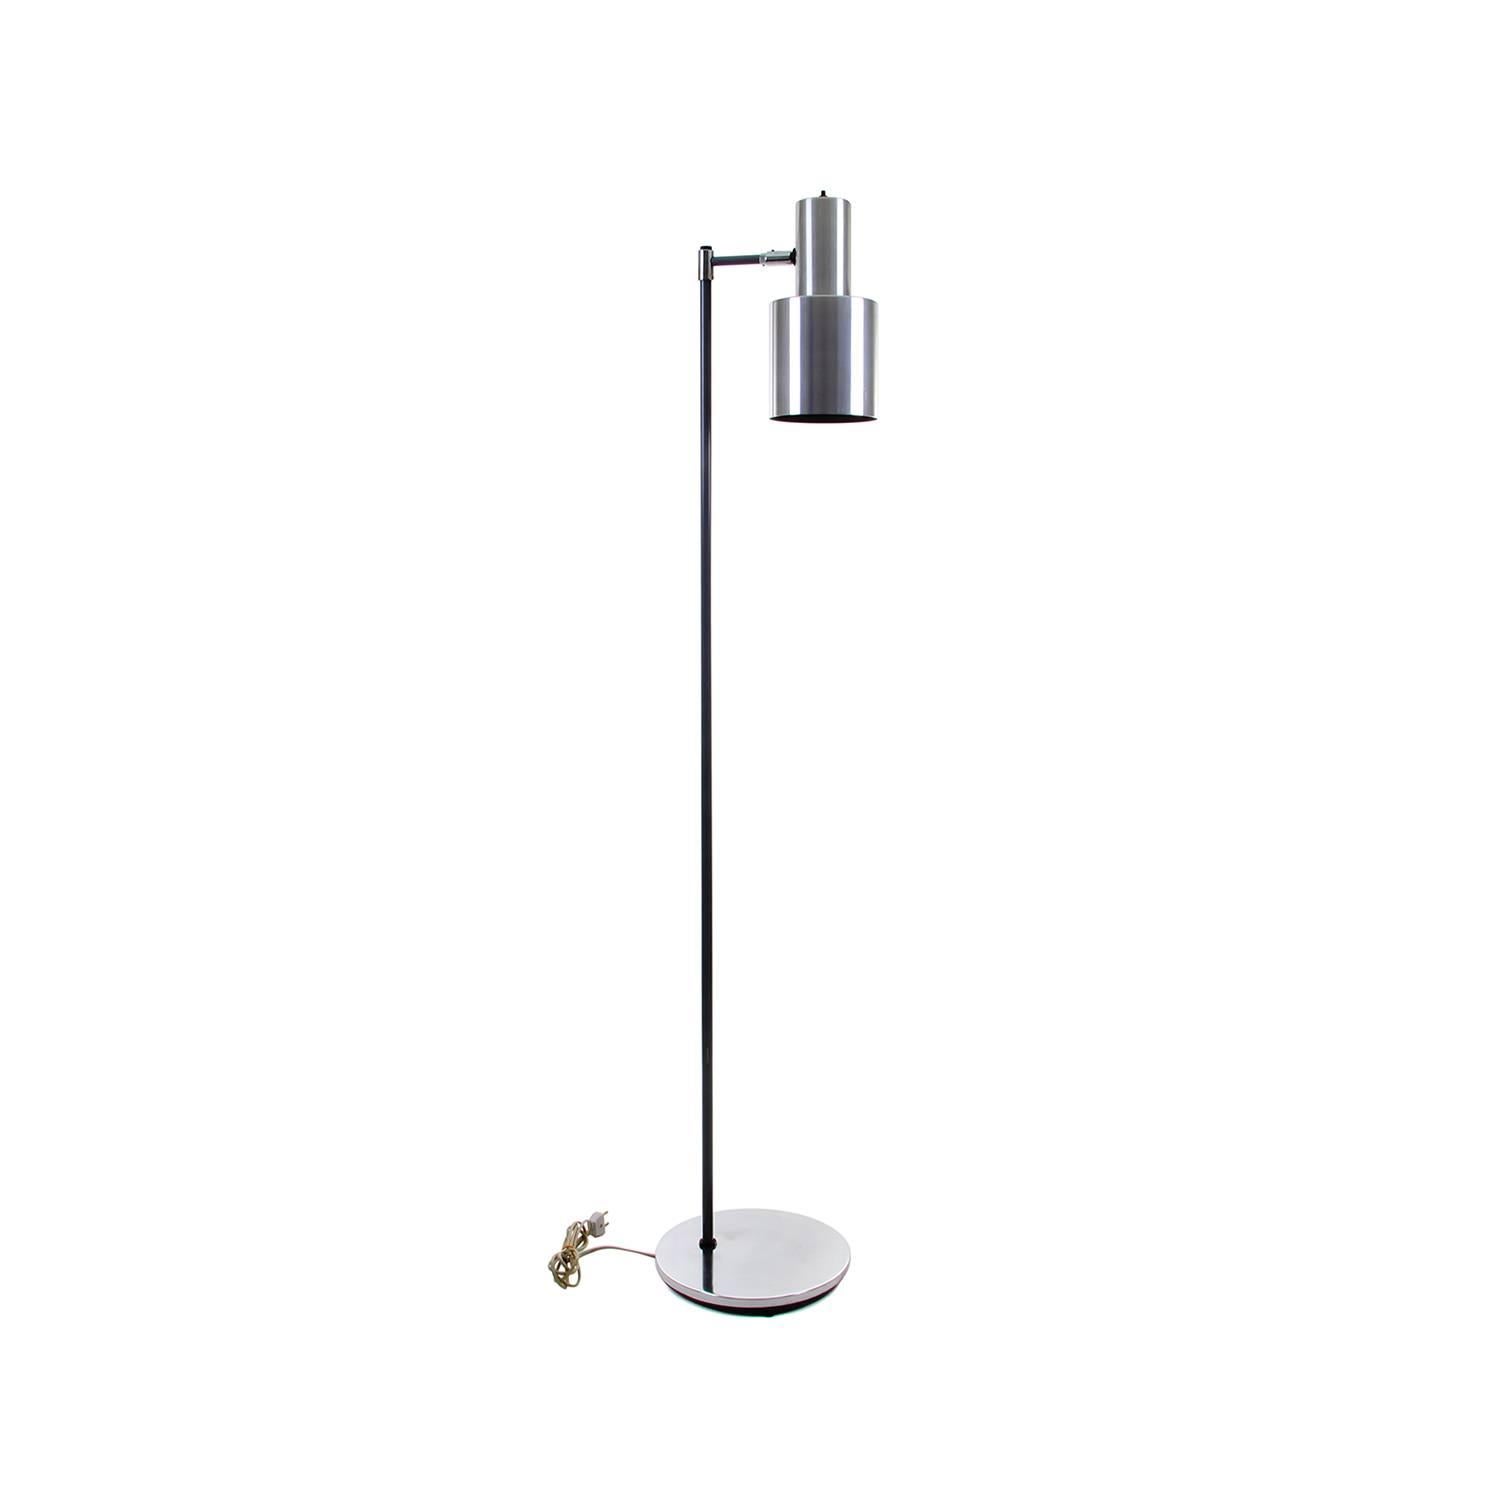 Stylish Danish midcentury floor lamp - the Studio is designed by Jo Hammerborg for Fog & Mørup in 1963 in very good vintage condition.

The Studio floor lamp is made of a circular aluminium base, from where a grey lacquered metal arm rise straight